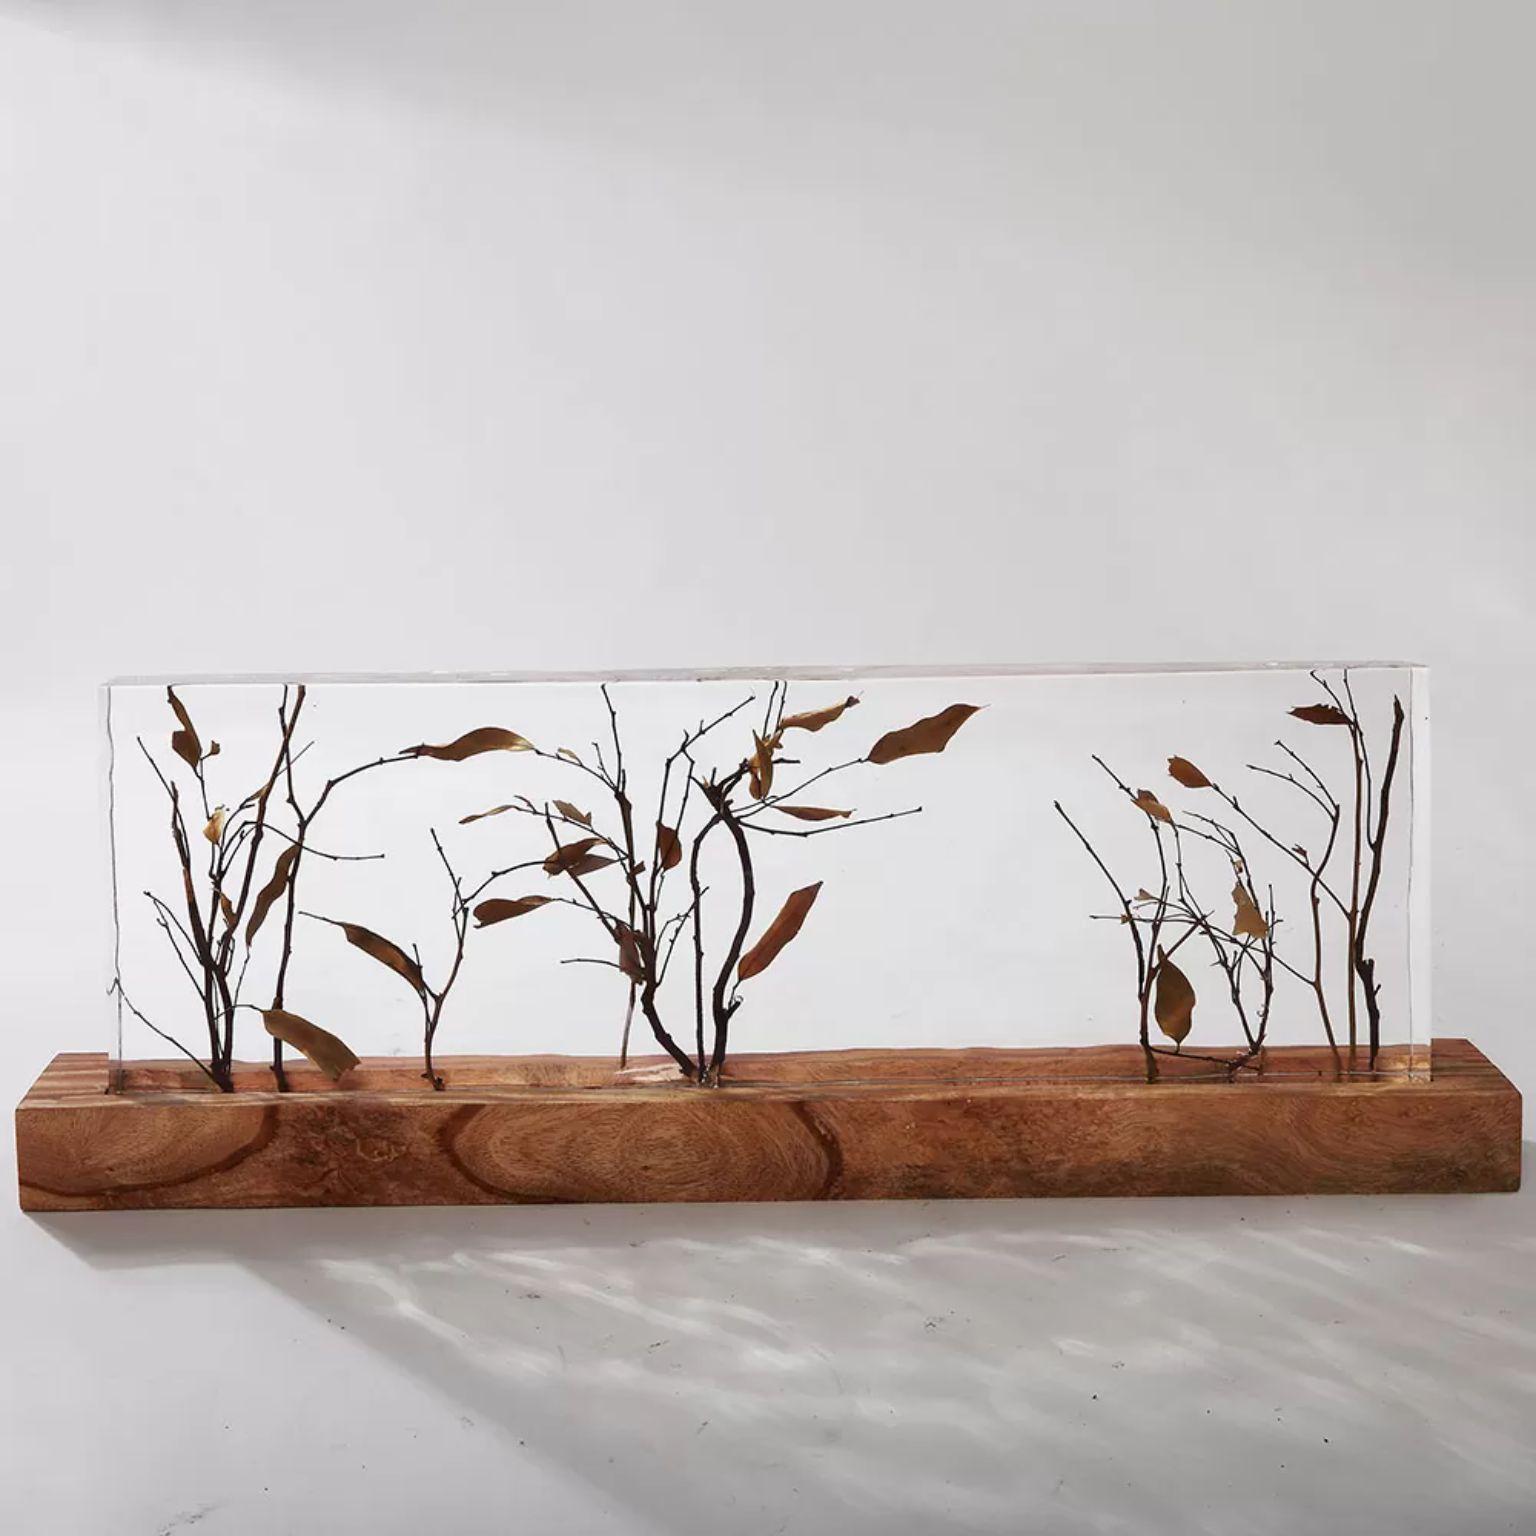 Crystal and Branch Tabletop Decor by Dainte
Dimensions: D 6 x W 71 x H 23 cm.
Materials: Crystal. 

The elegant and sophisticated tabletop decor will bring a touch of nature into your home or office. Organic wooden branches are encased in crystal